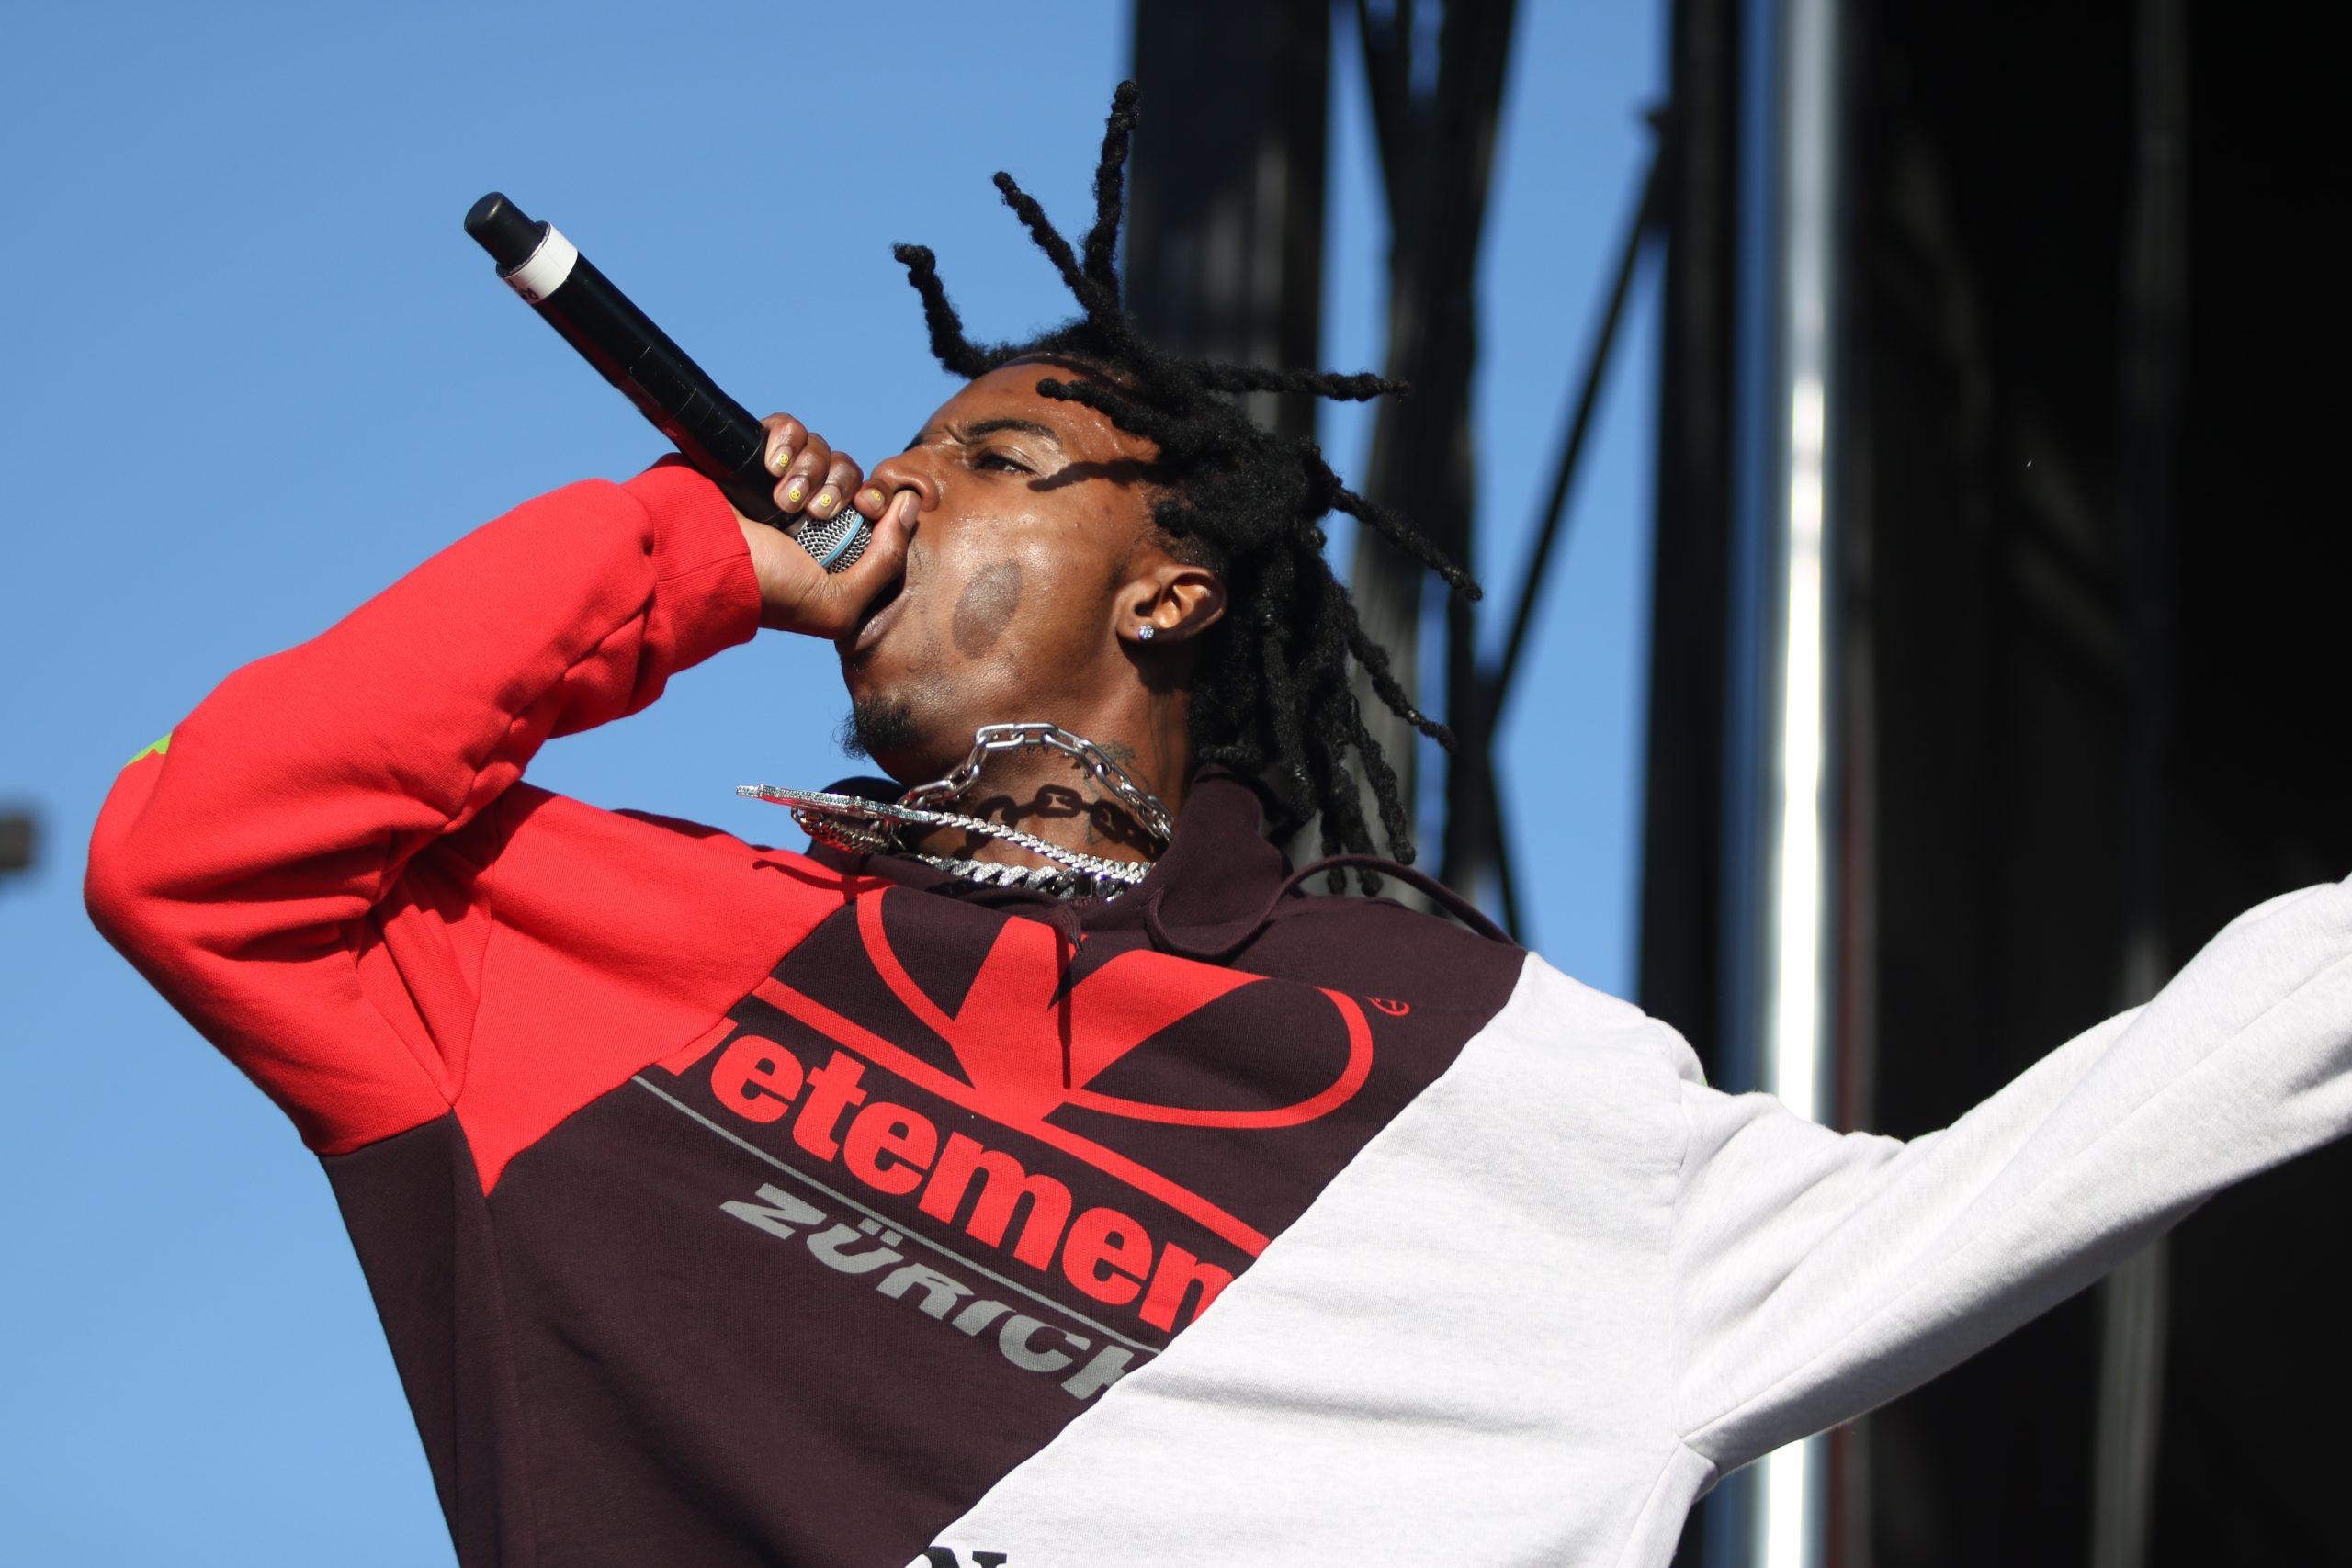 Photo+gallery%3A+Artists+perform+at+the+2018+JMBLYA+Music+Festival